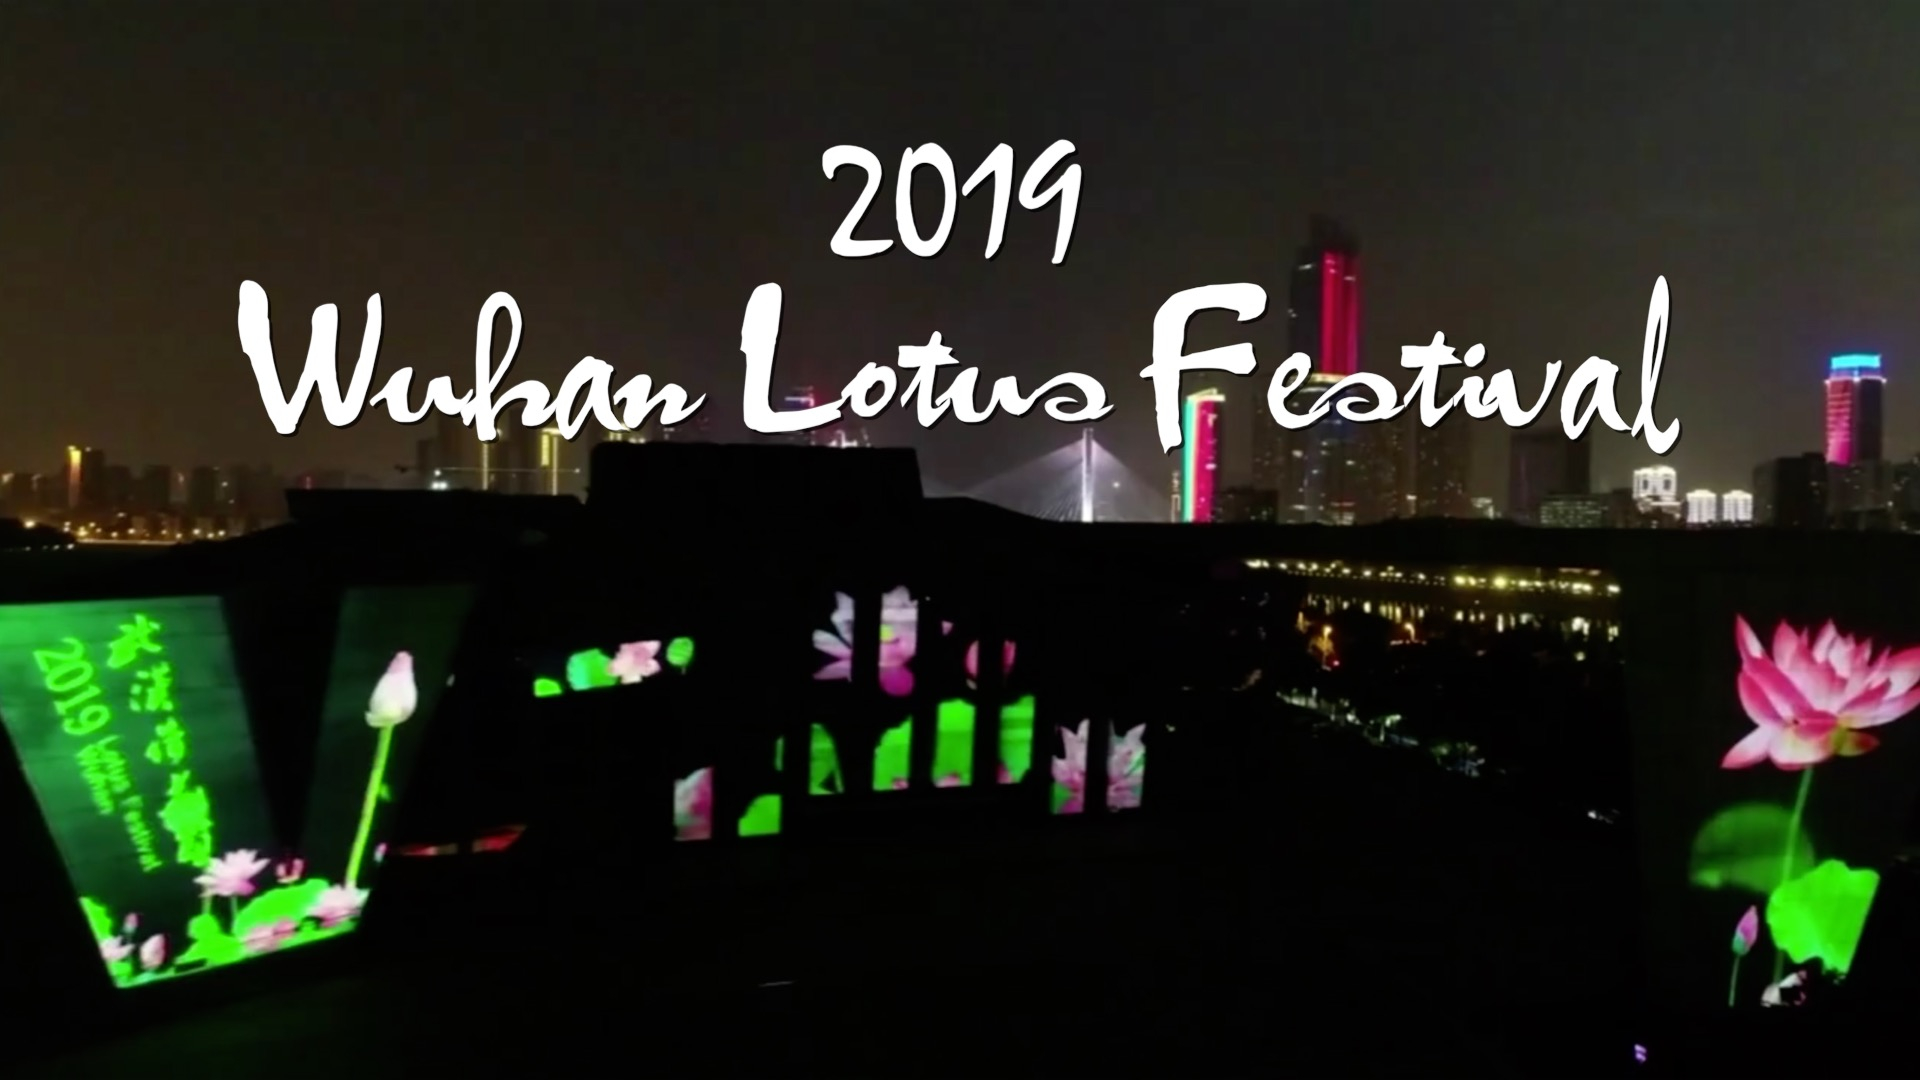 Lotus festival opens with stunning drone and light show in China CGTN